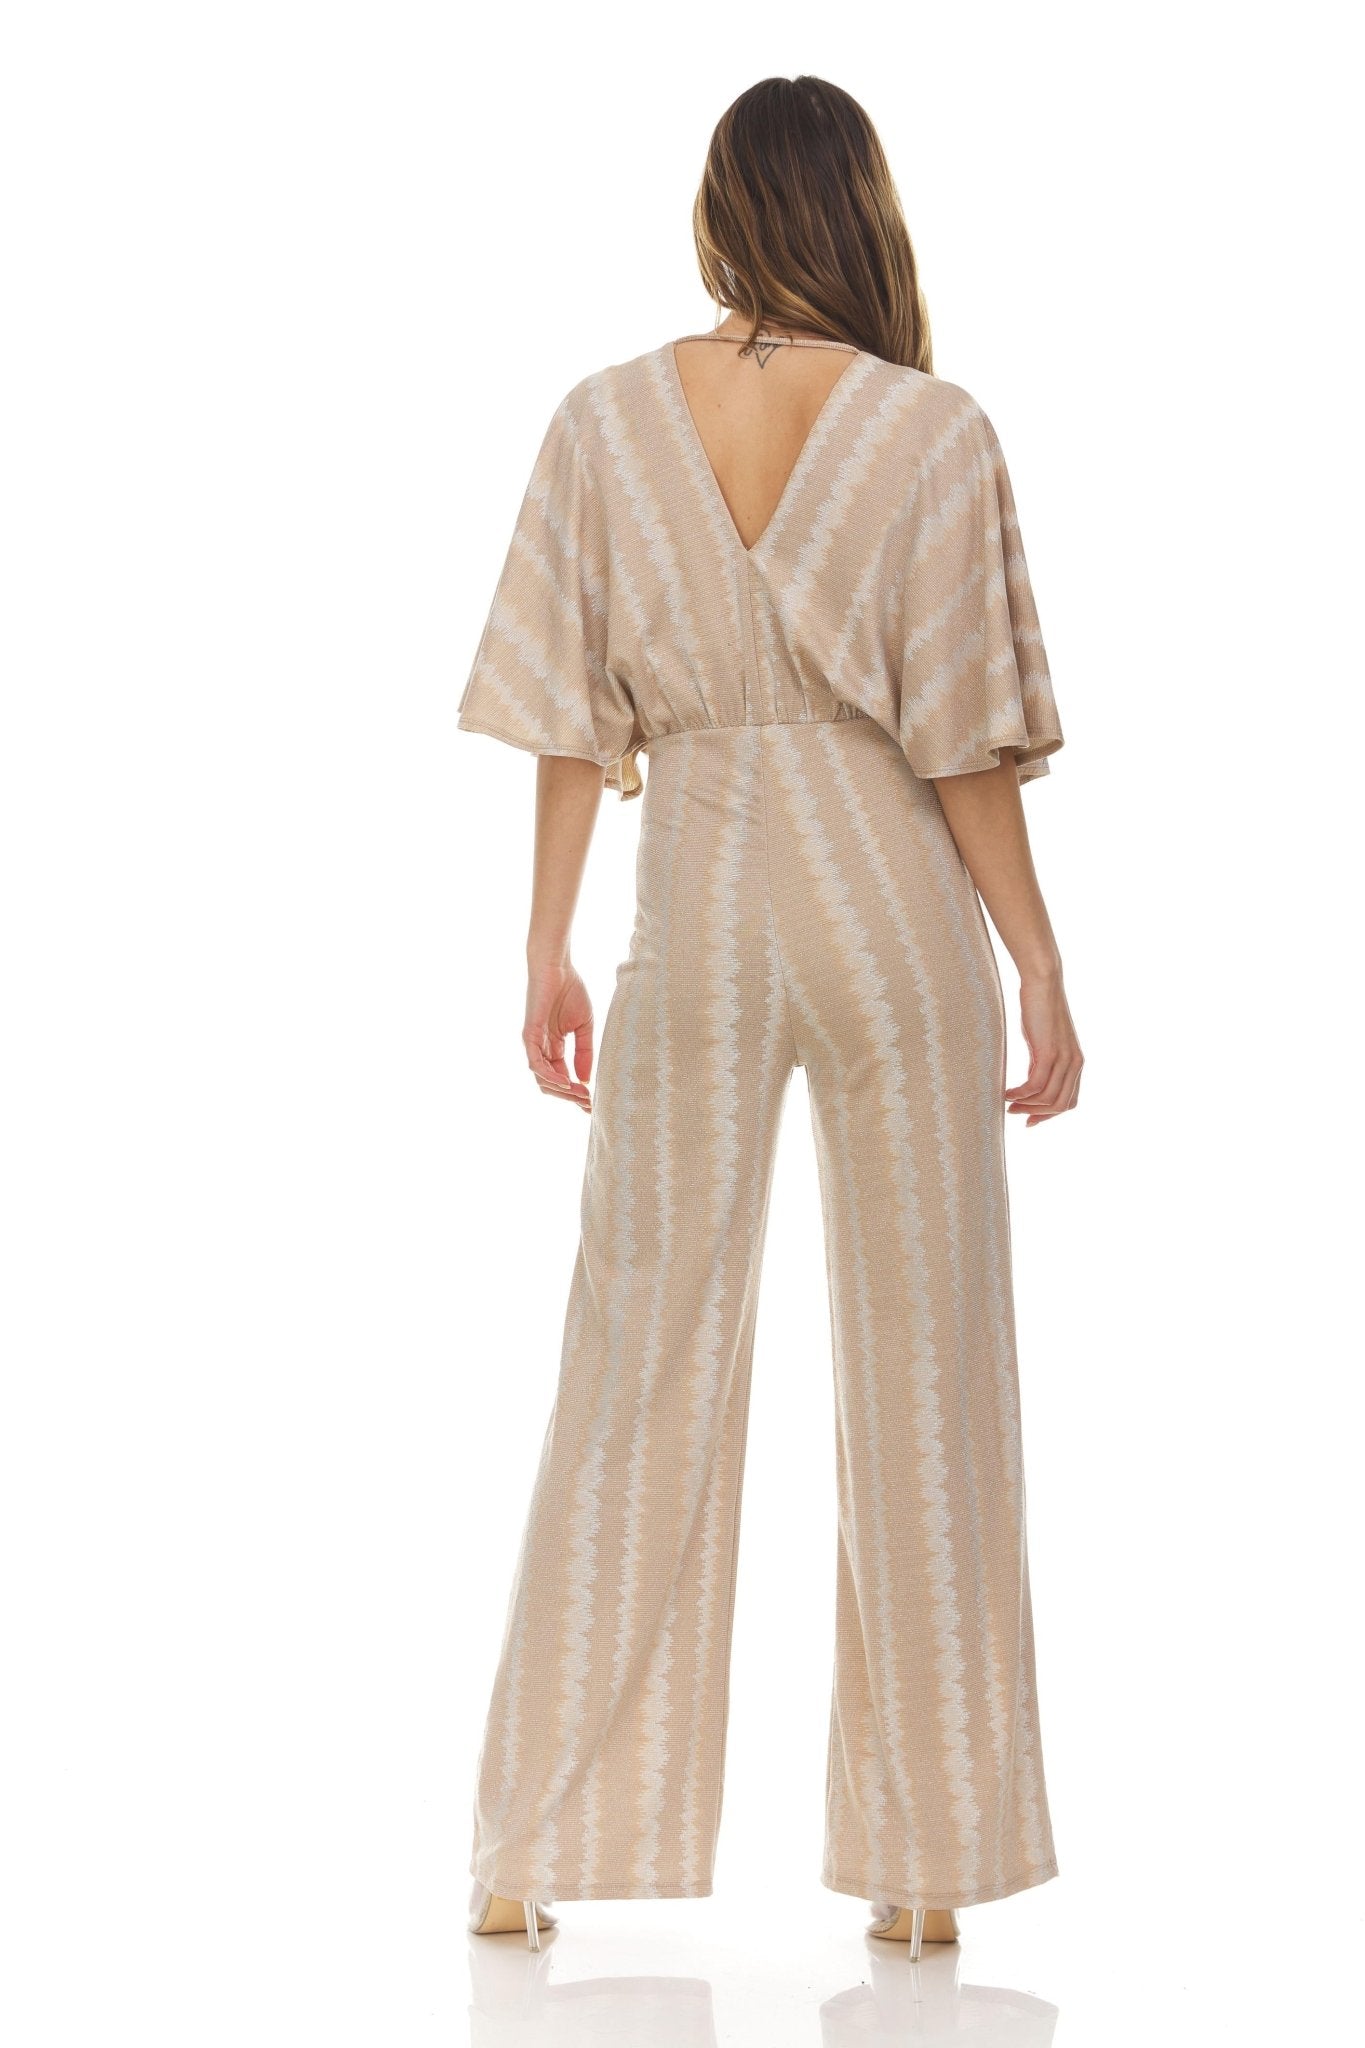 Stripped Lurex With Wide Sleeves And Flared Pant Leg Jumpsuit - DressbarnJumpsuits & Rompers